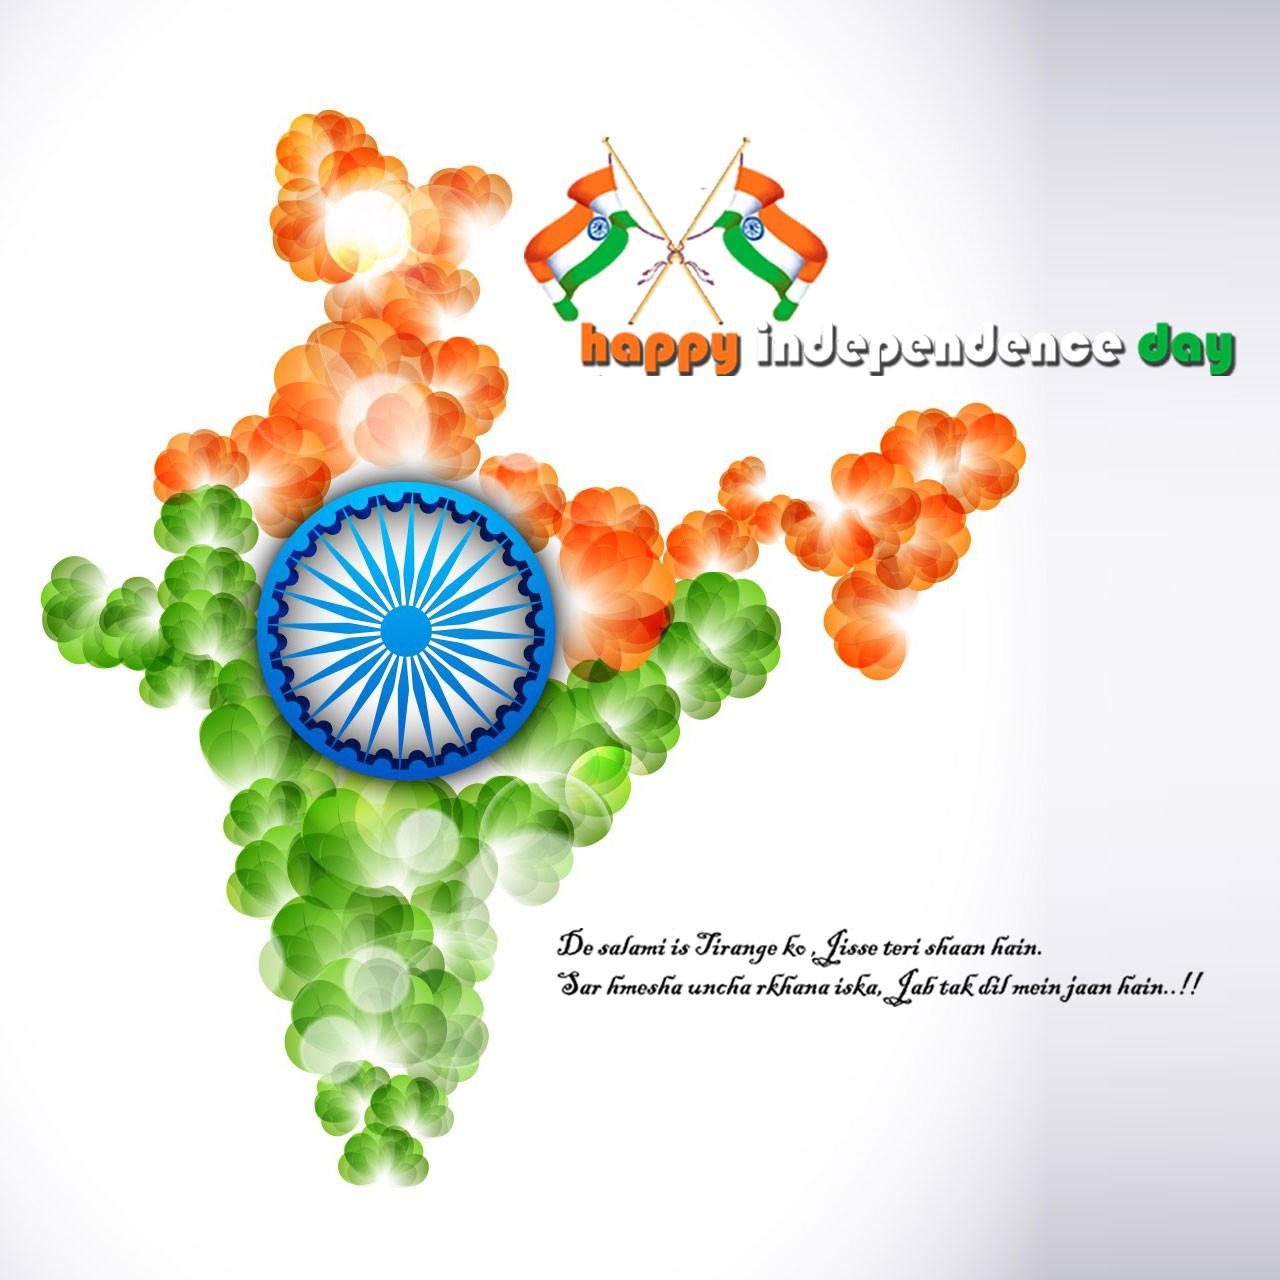 Happy Independence Day Wallpaper On Republic Day